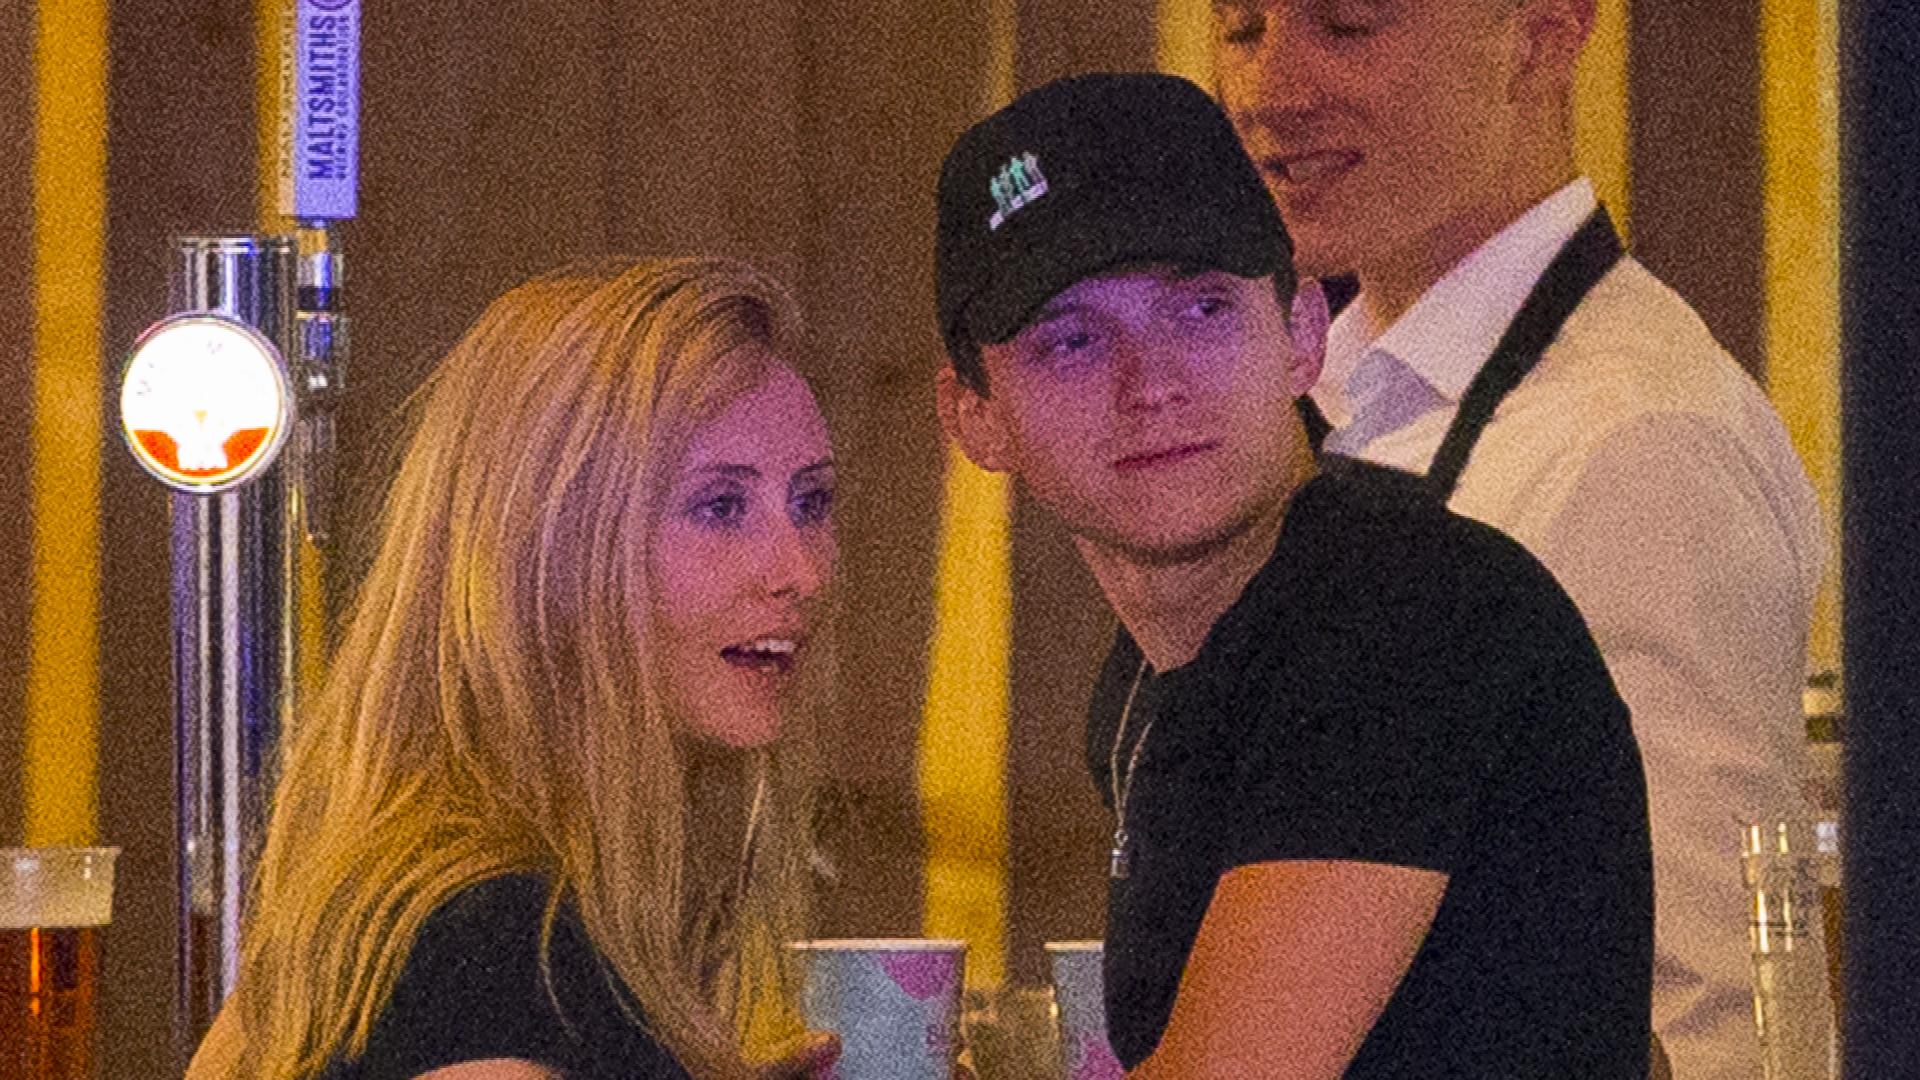 Spider-Man' Star Tom Holland at Hyde Park with Mystery Blonde